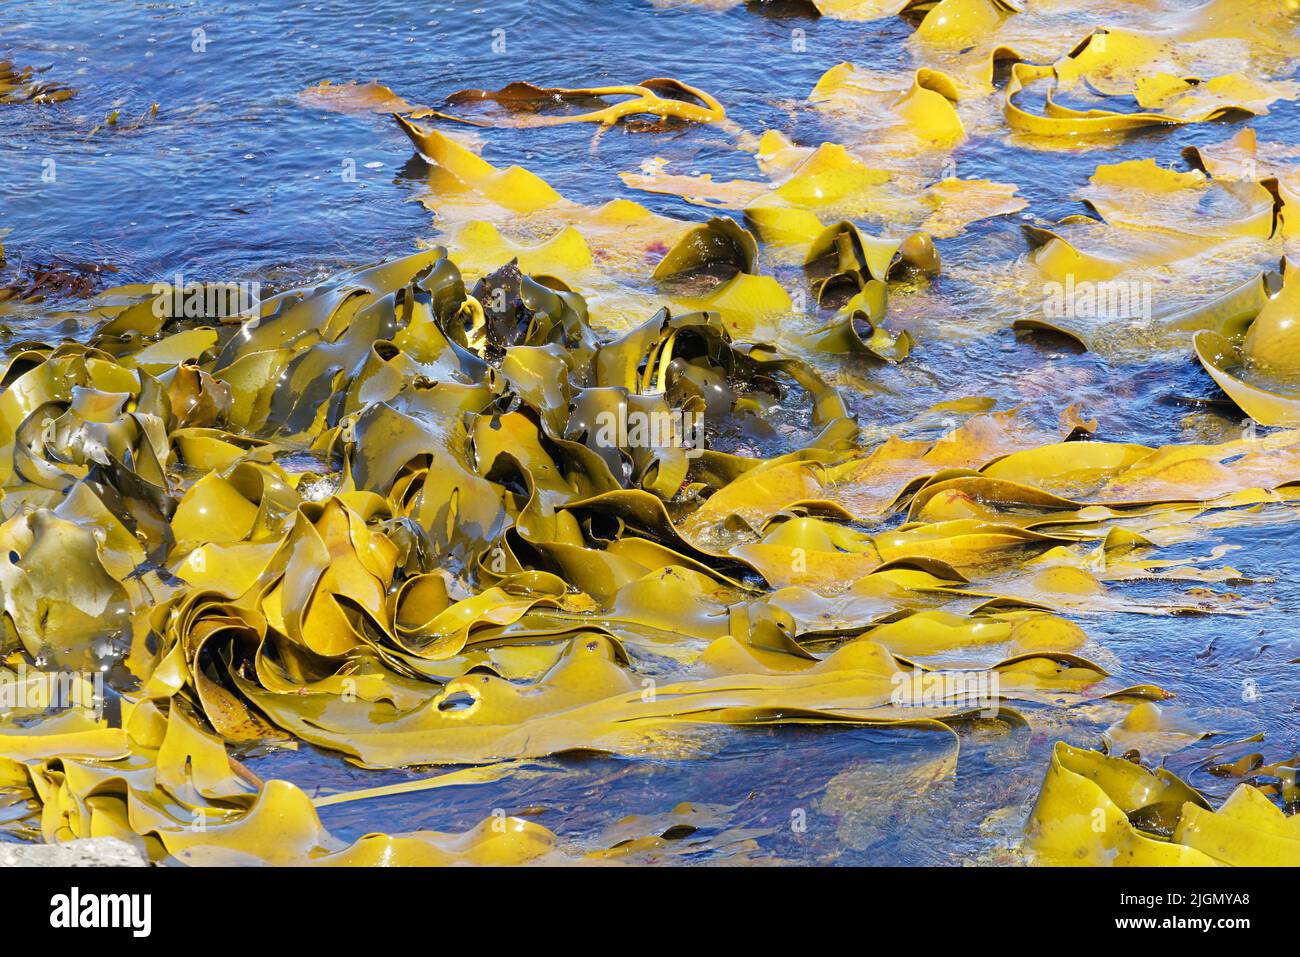 Kelp seaweed floating on the sea and rolling with the wave action, east coast, Aotearoa / New Zealand. Stock Photo